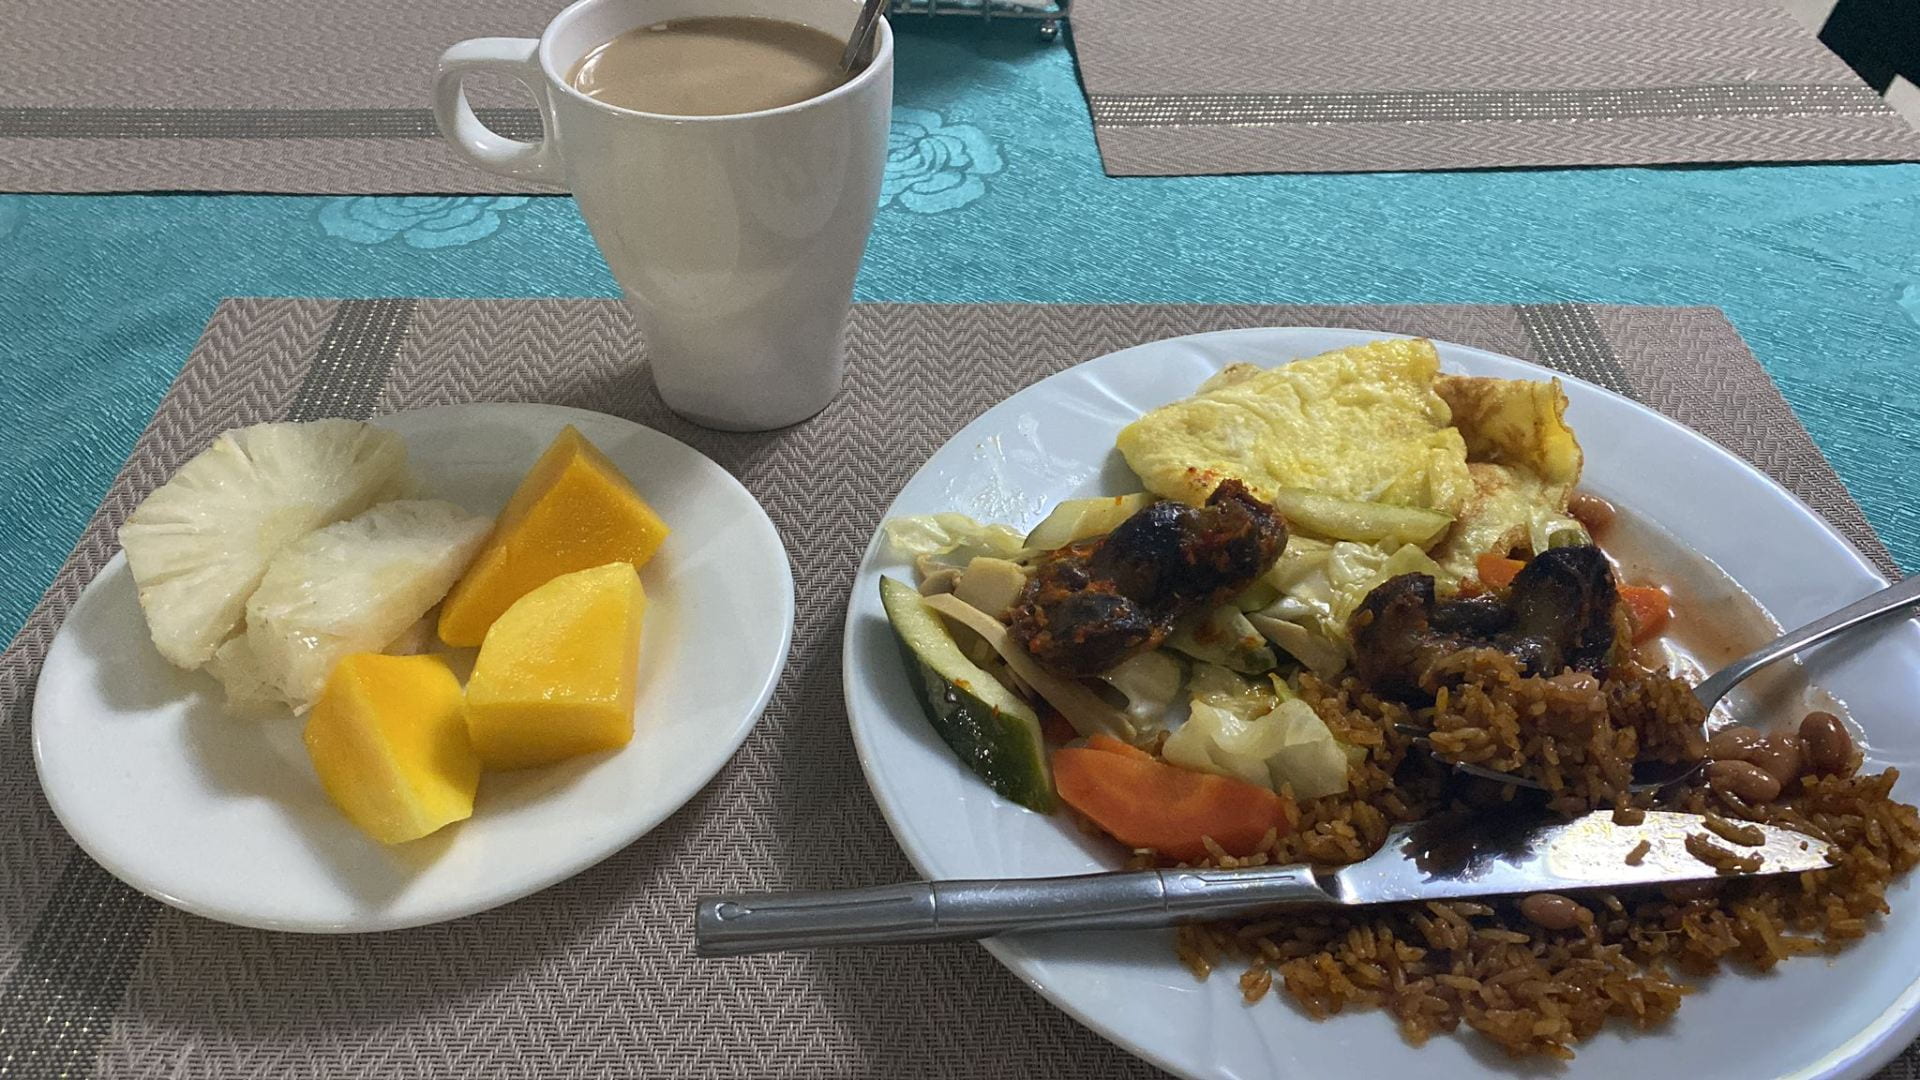 A breakfast plate containing rice, eggs, gizzards, vegetables, and fruit.